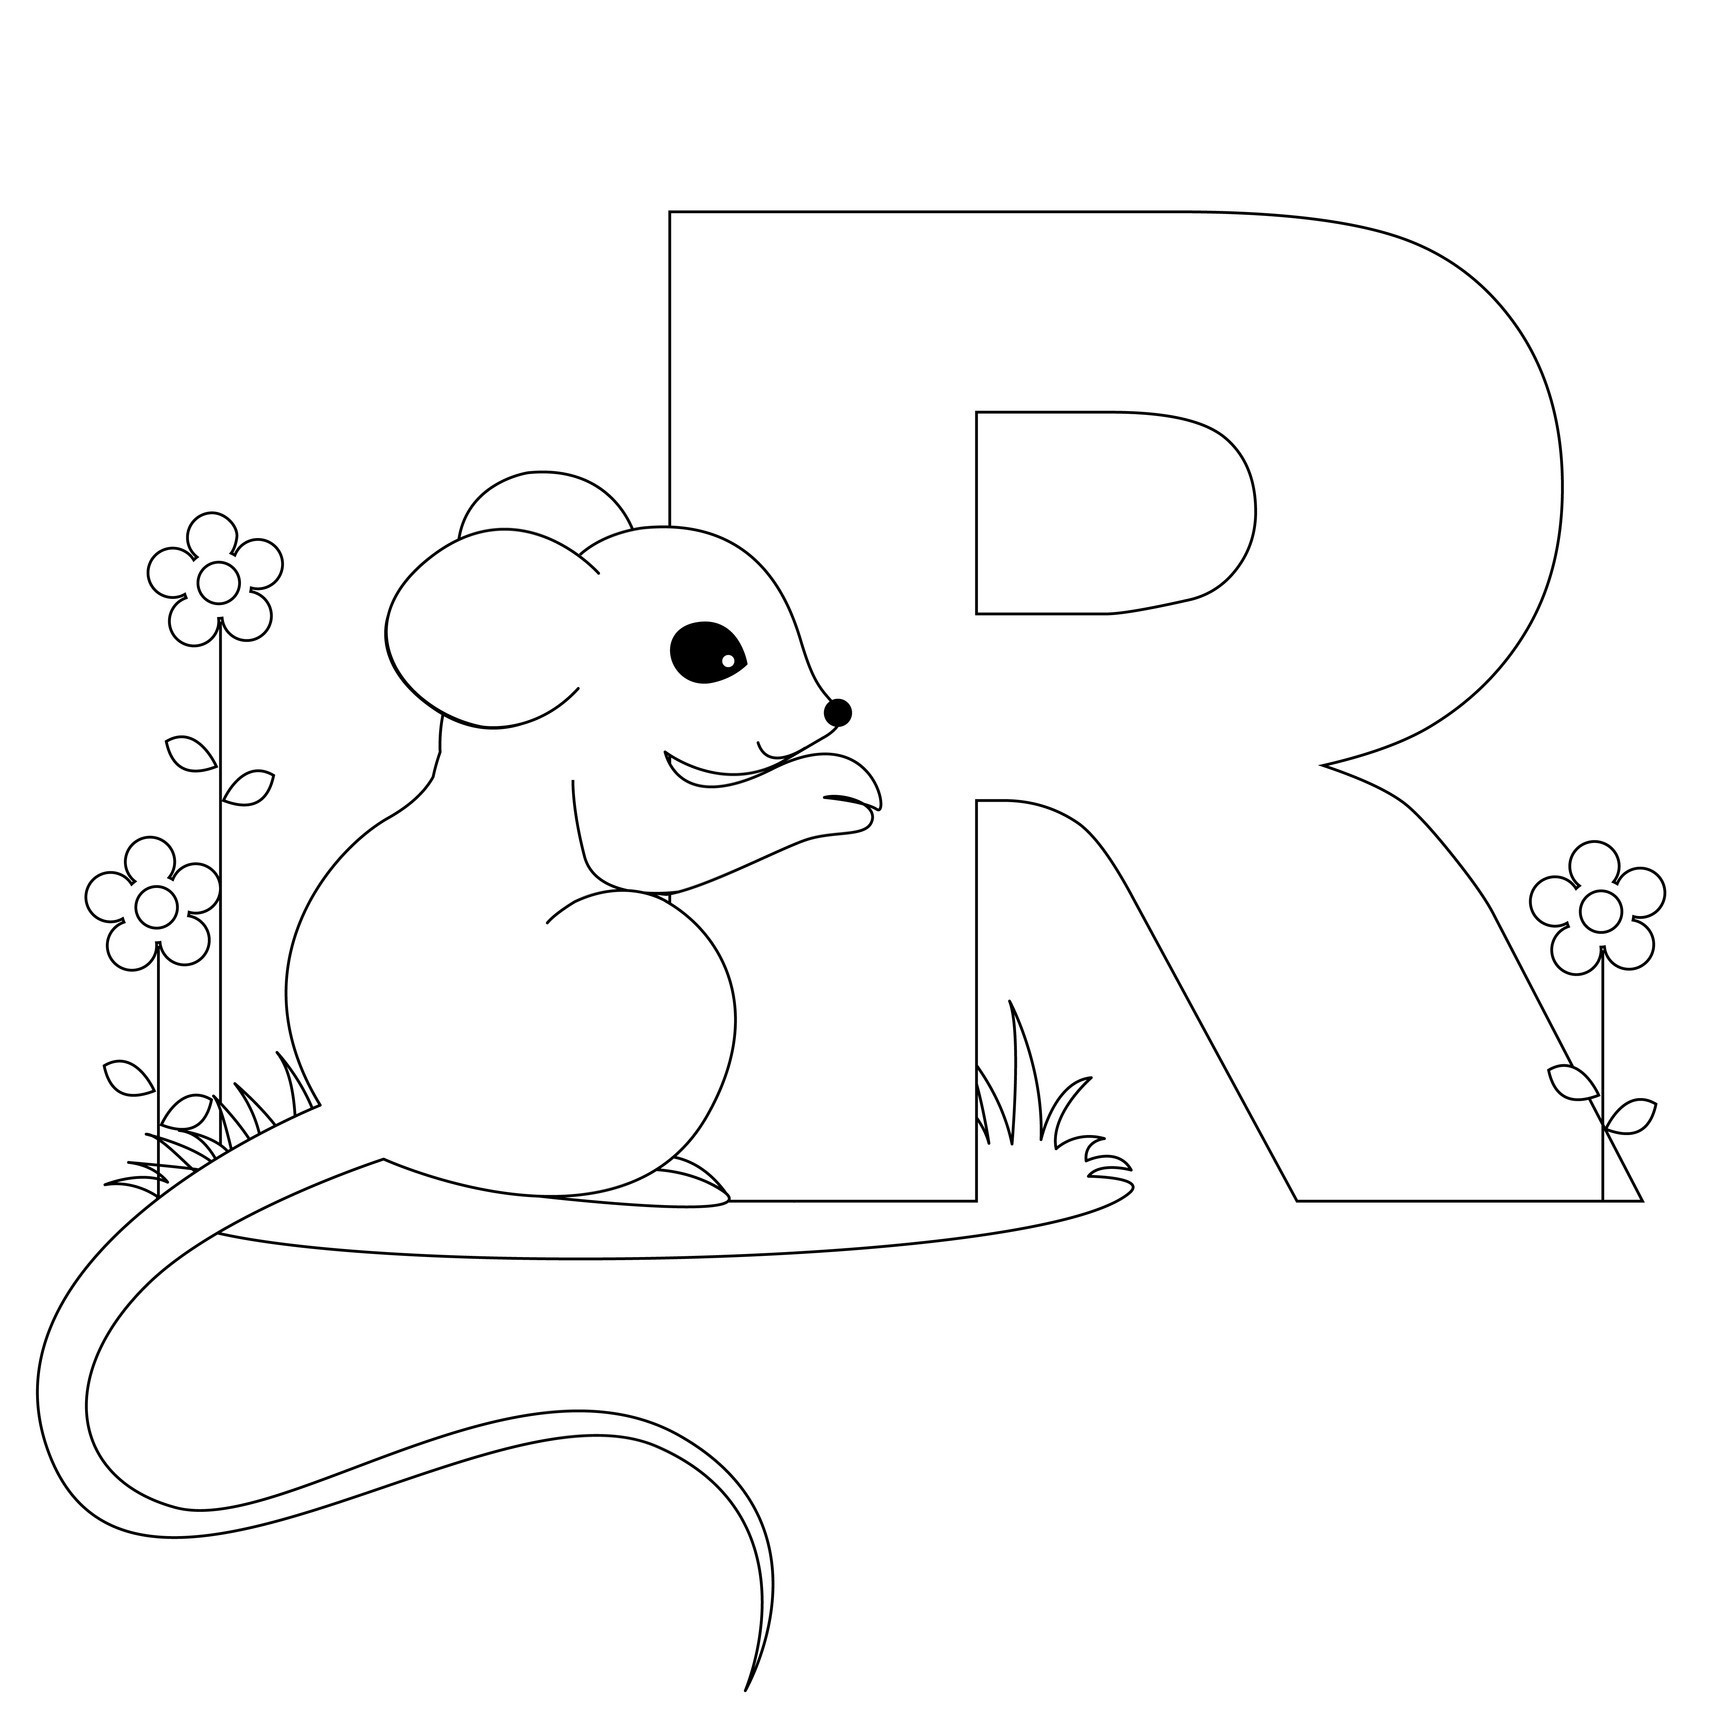 Alpahbet Coloring Pages
 Free Printable Alphabet Coloring Pages for Kids Best